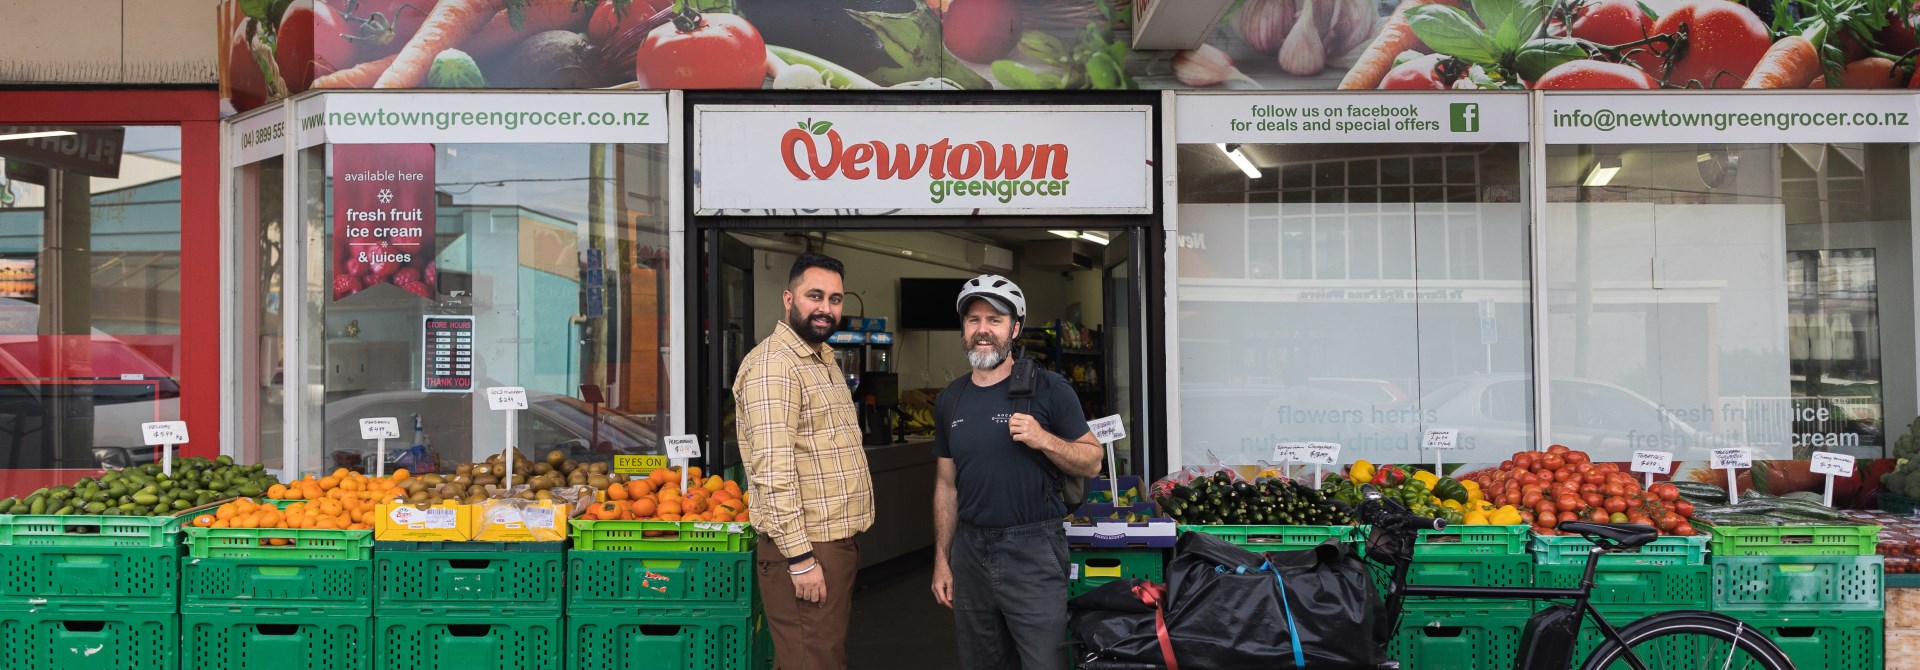 Two people standing outside of a Greengrocer in Newtown with an ebike and veges out front.